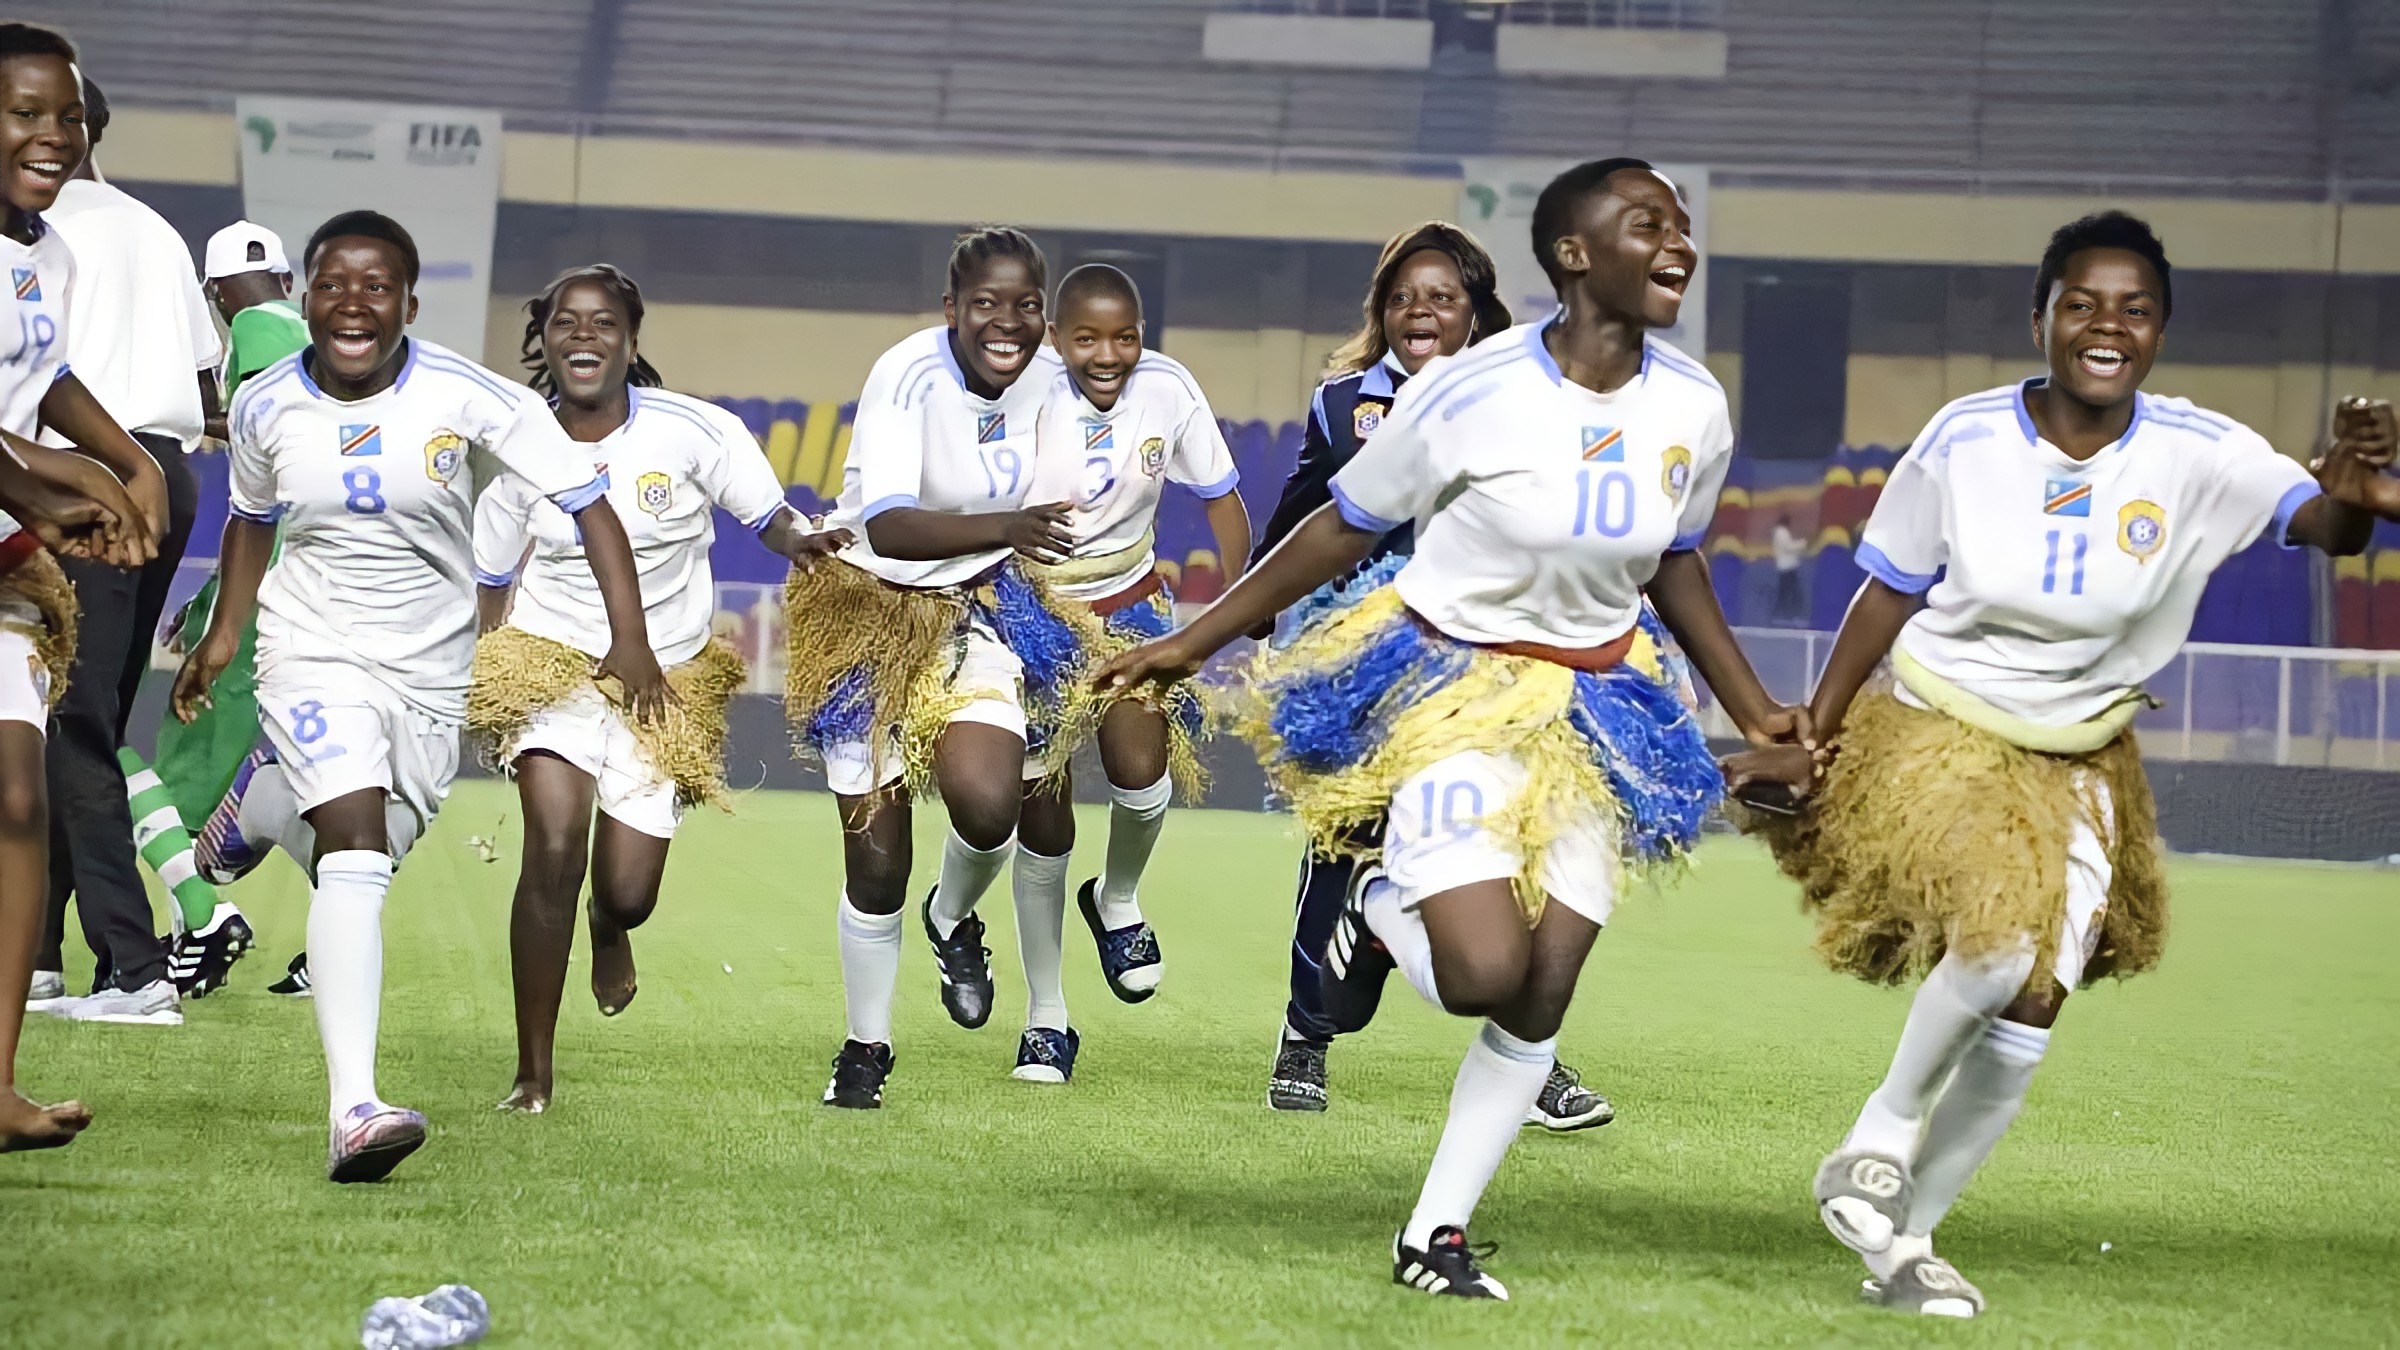 Congolese players celebrate winning the 1st African School Champions Cup organized by FIFA in 2022. Photo: UN Women/Adriana Borra.